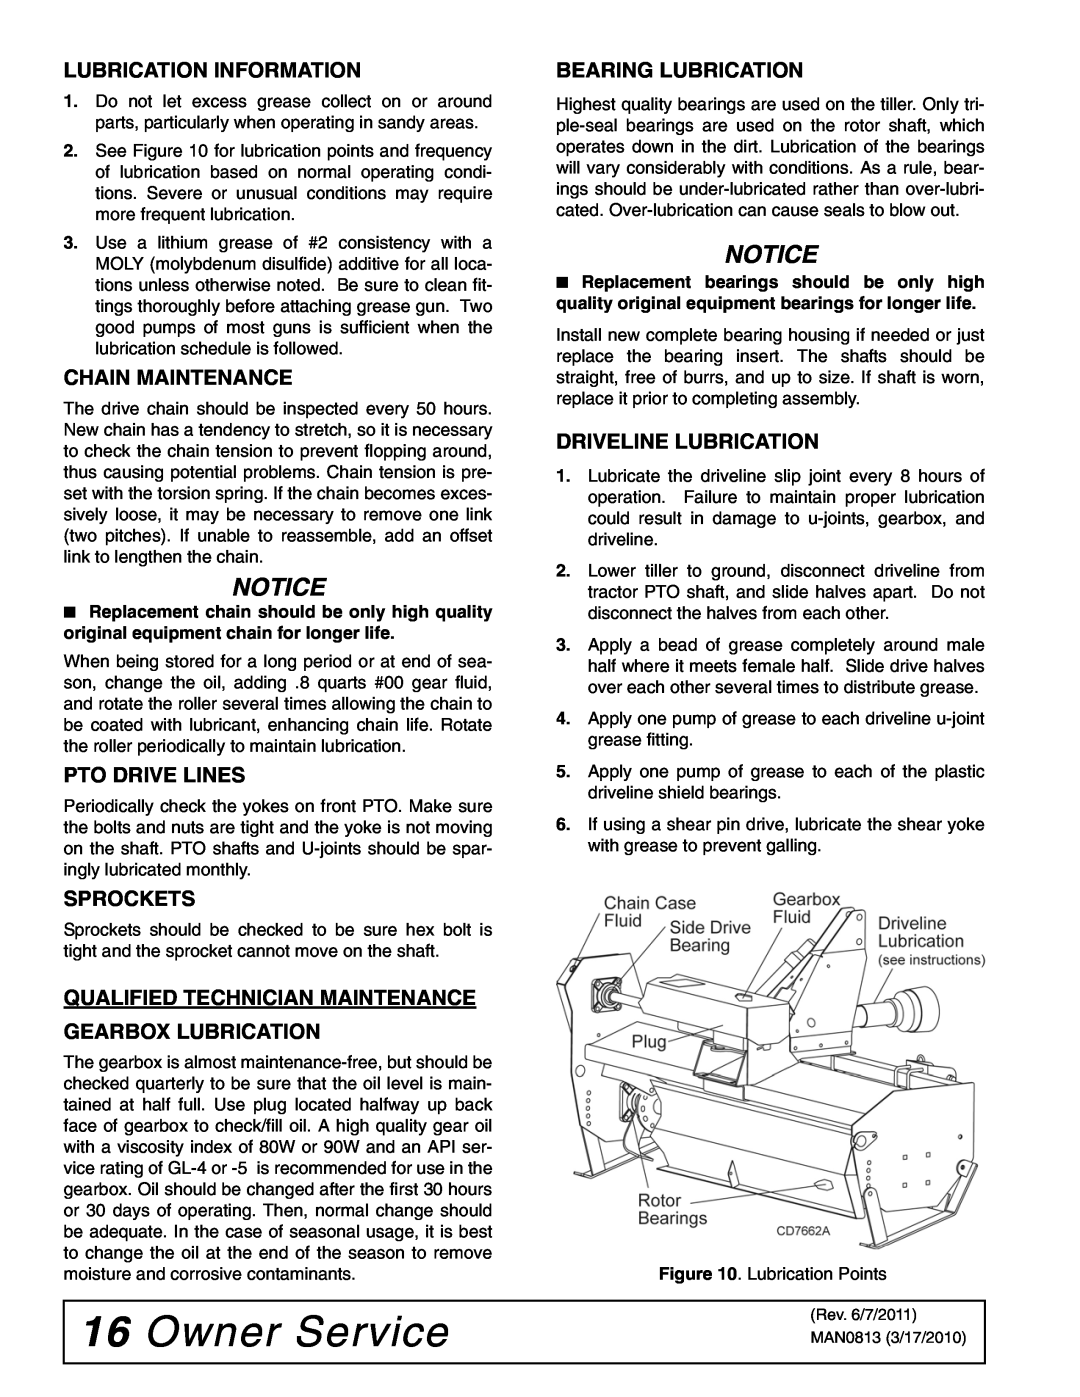 Woods Equipment TC60, TCR60, TCR68 Owner Service, Lubrication Information, Chain Maintenance, Pto Drive Lines, Sprockets 